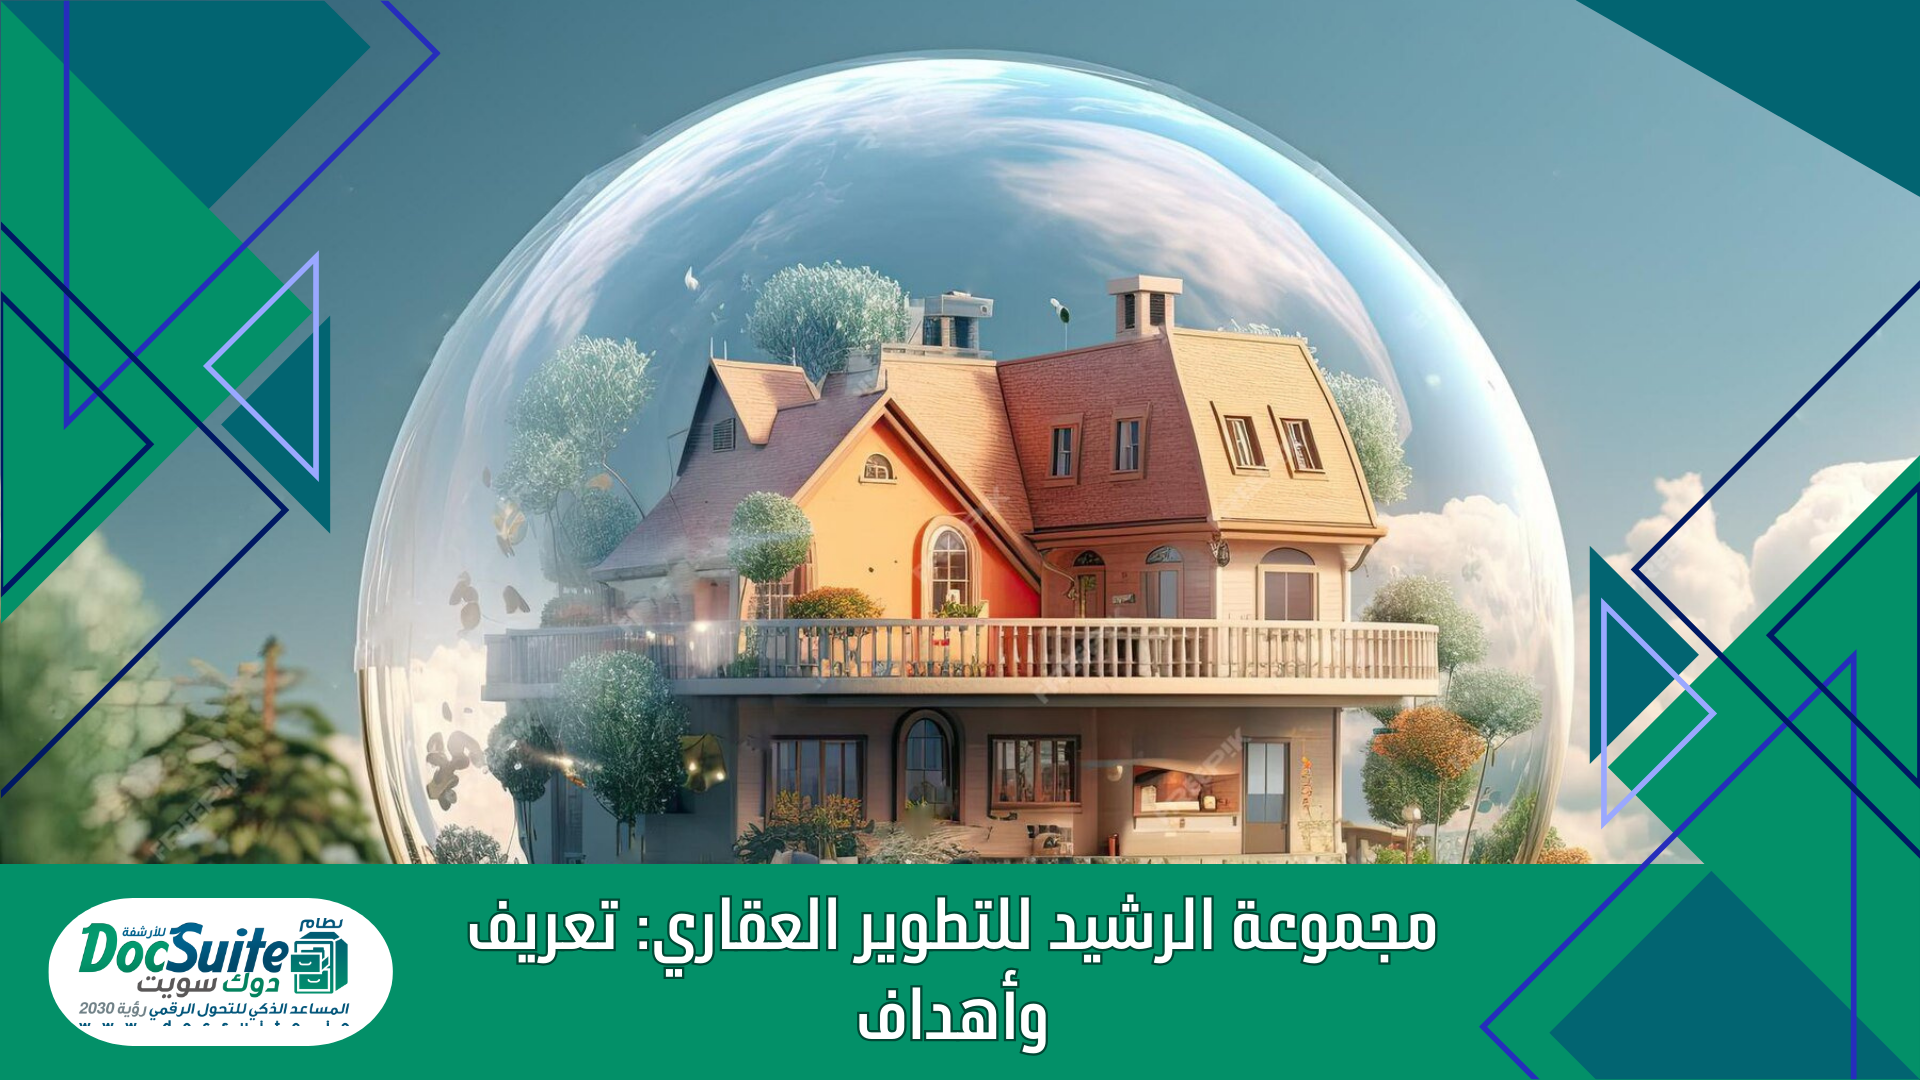 Al Rasheed Real Estate Development Group: Definition and objectives